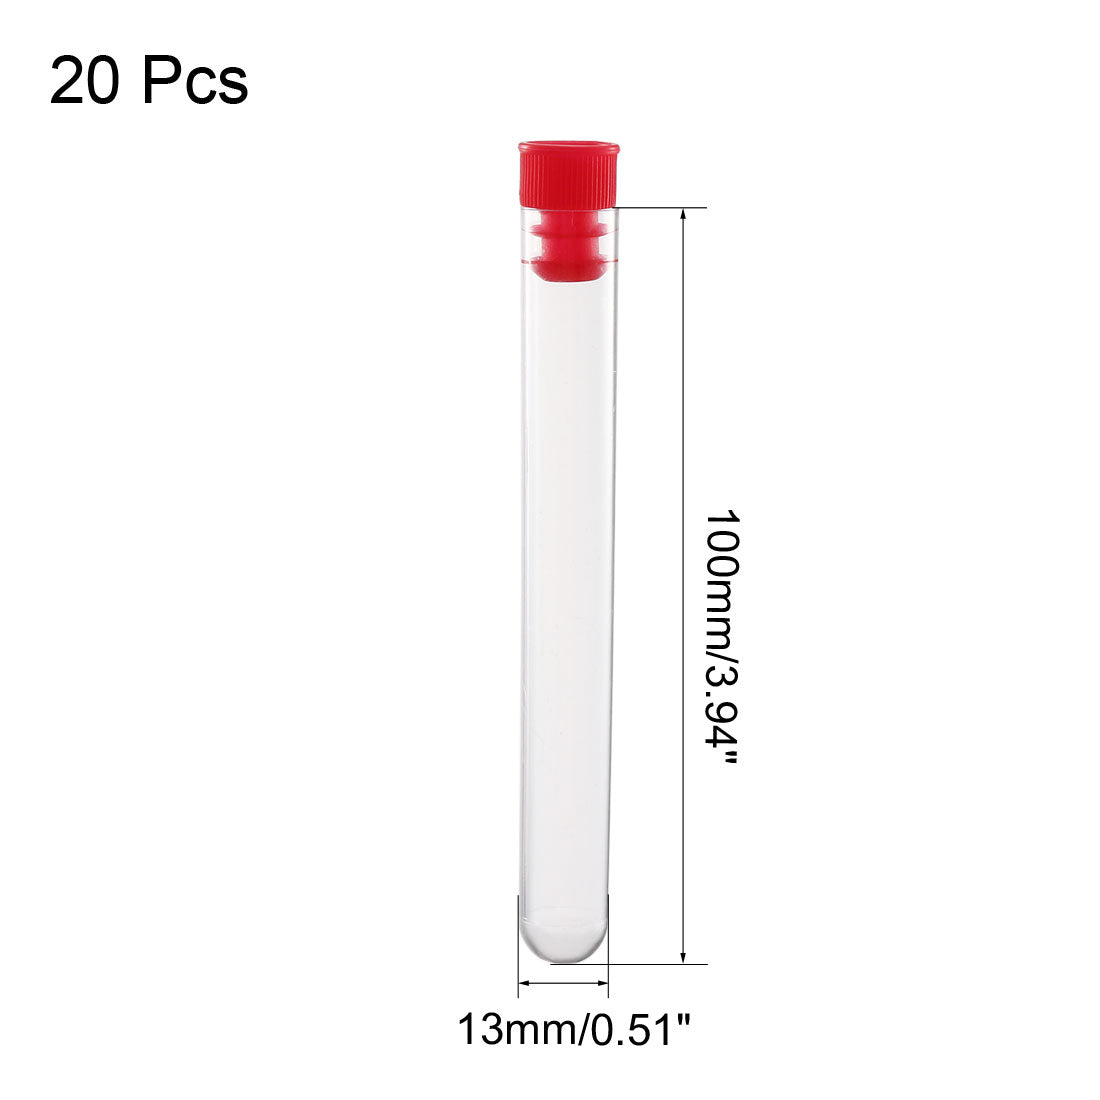 uxcell Uxcell 20 Pcs Centrifuge Test Tube Round Bottom Polystyrene with Red Cap